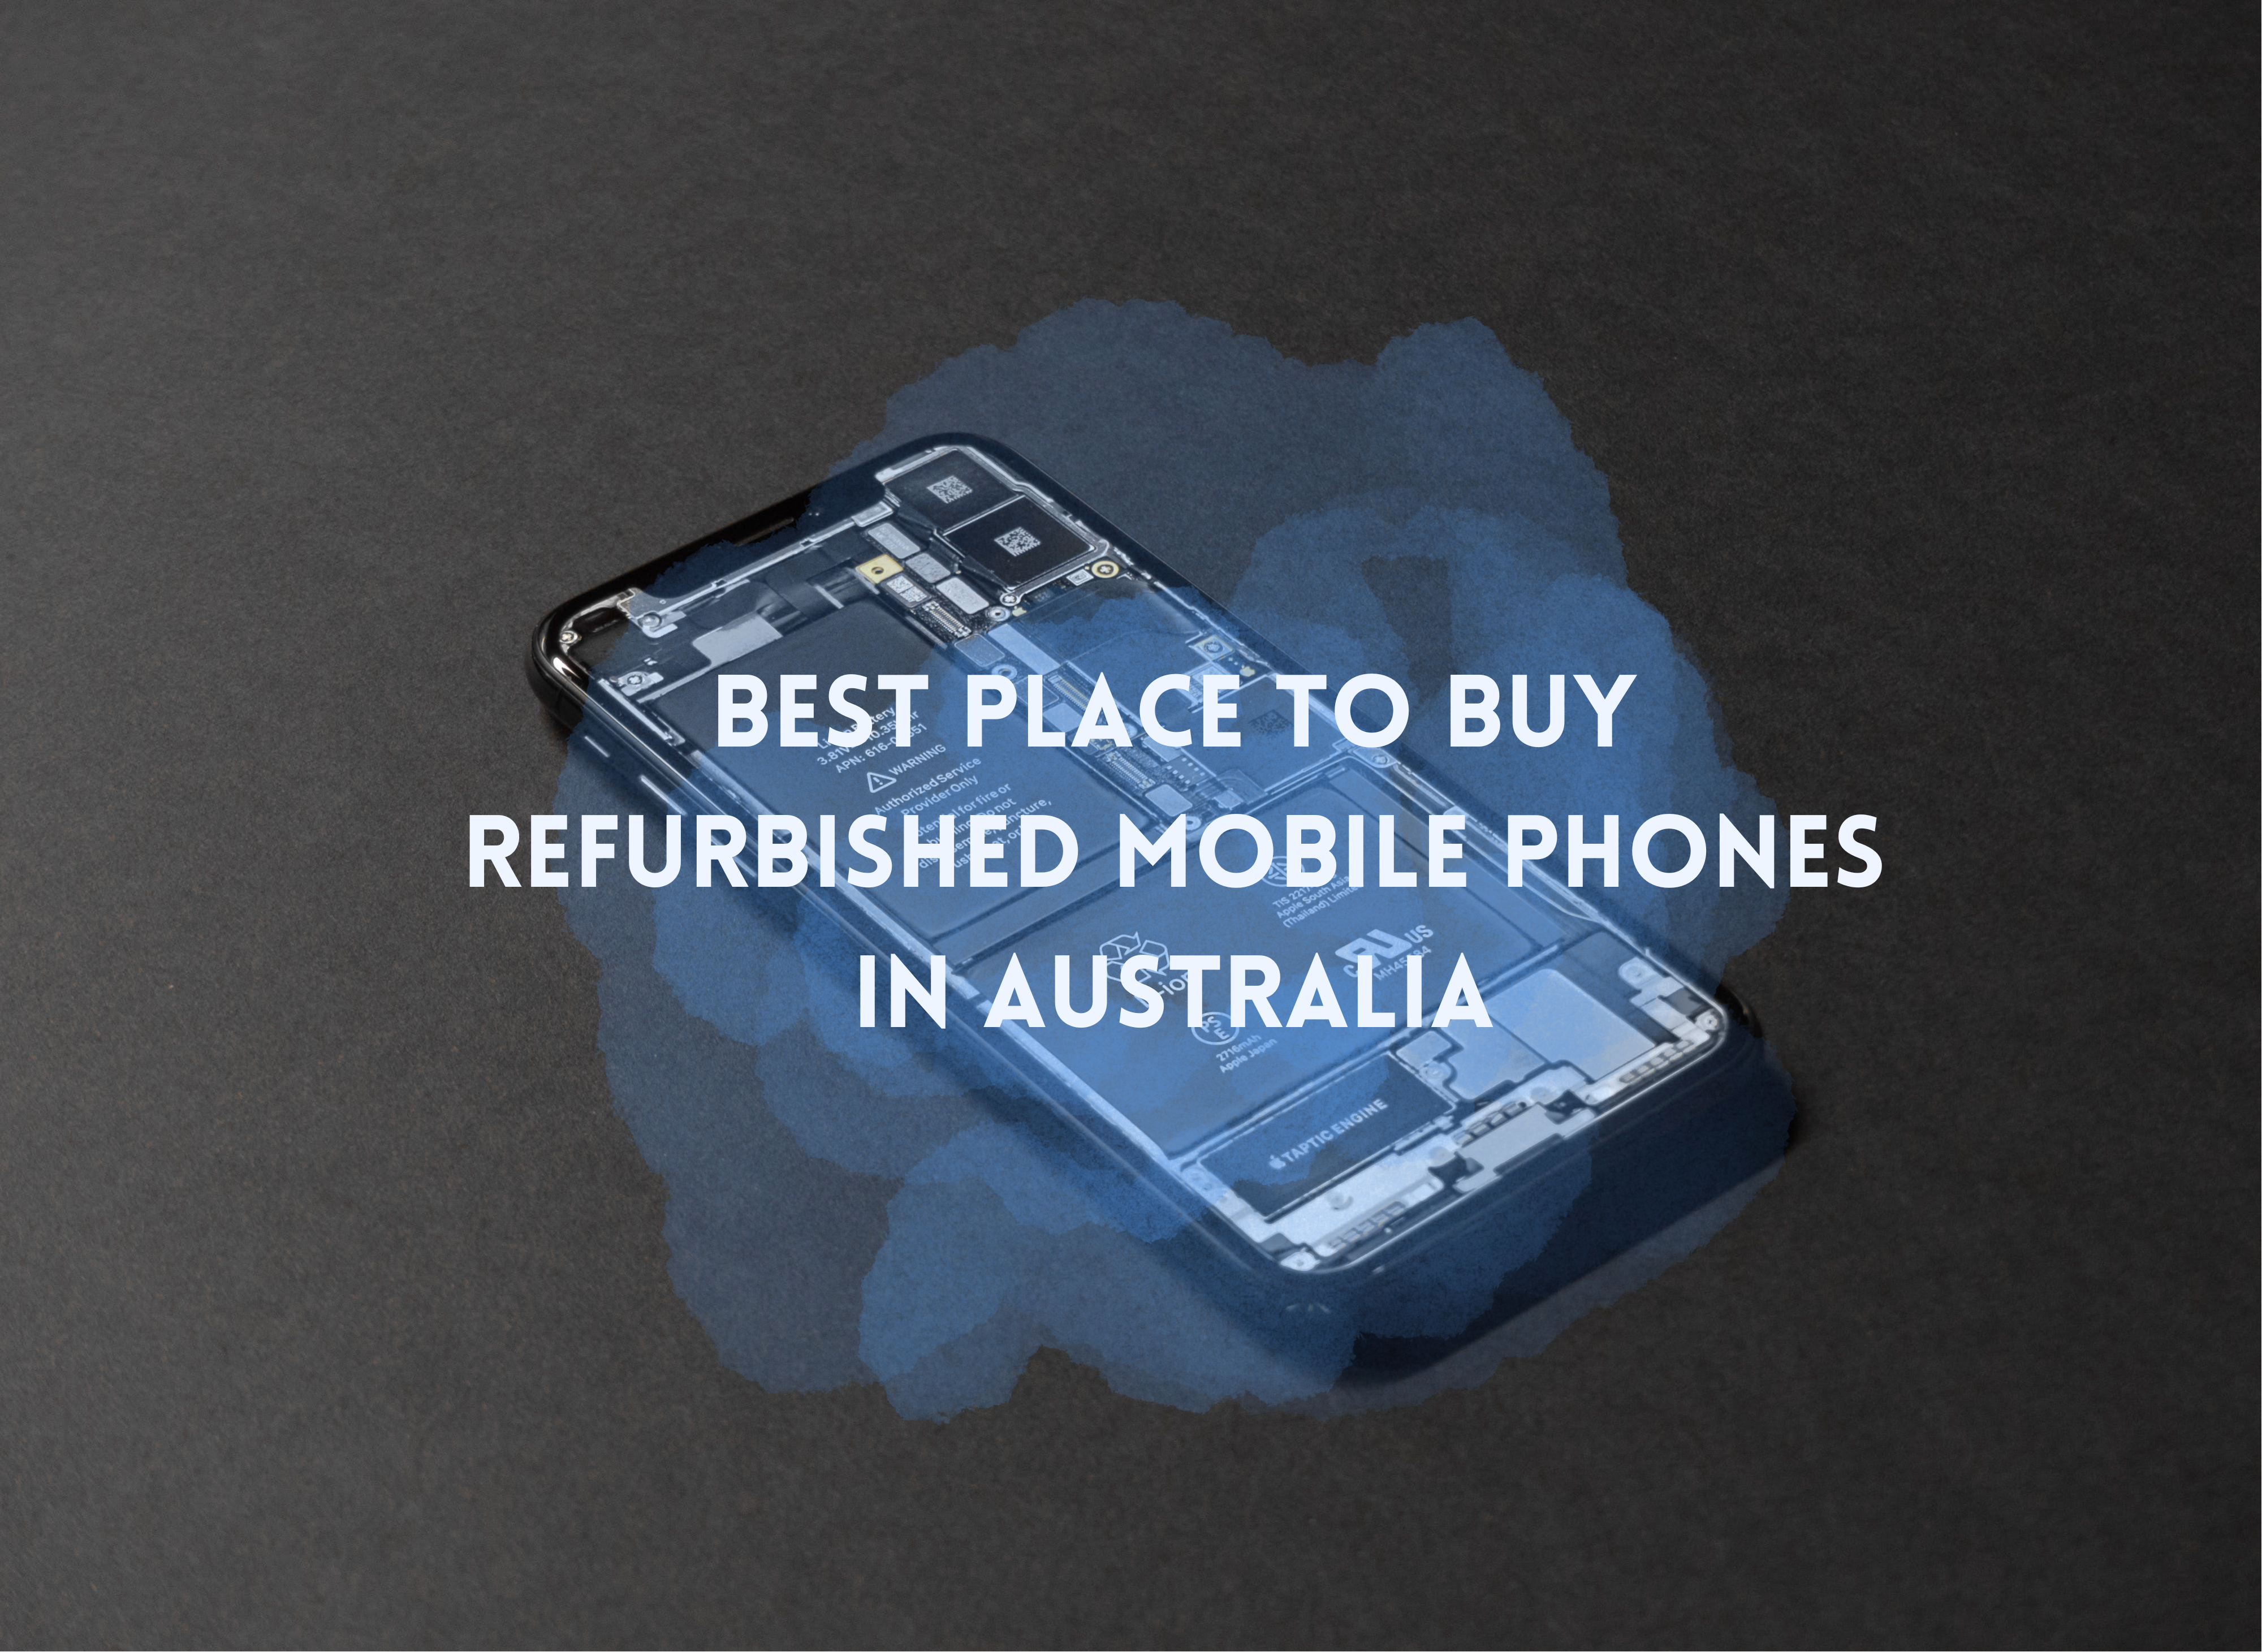 Best Place To Buy Refurbished Mobile Phones In Australia